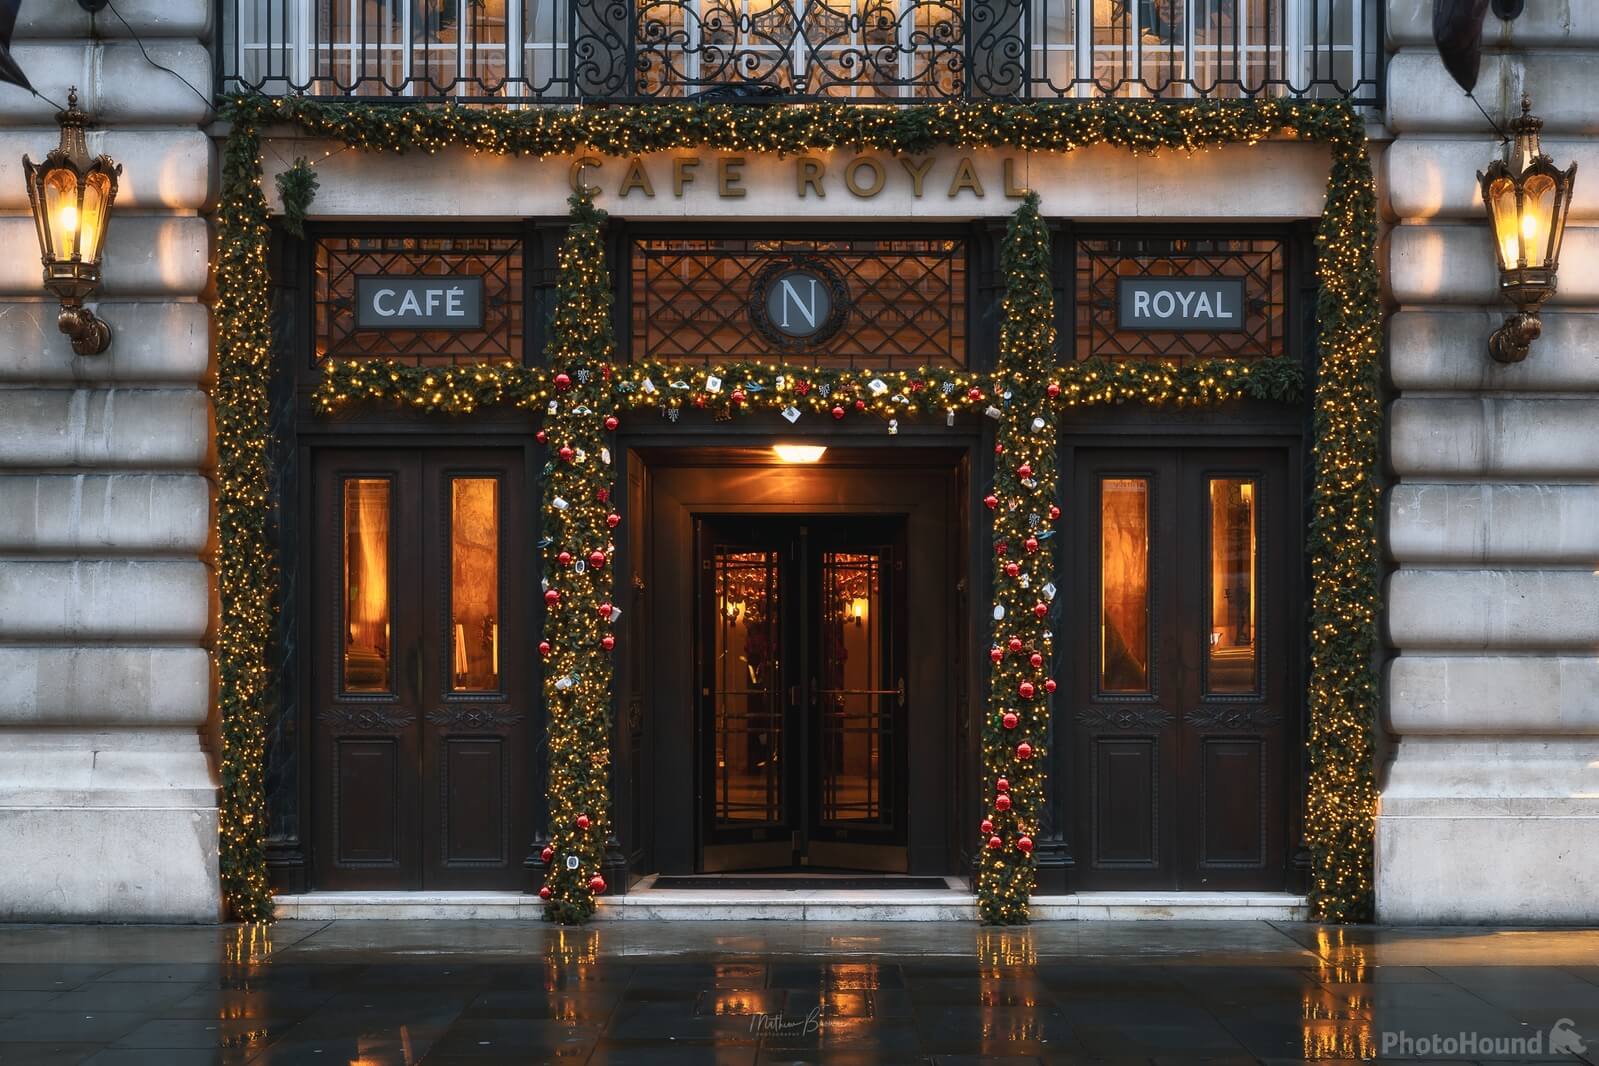 Image of Cafe Royal - Exterior by Mathew Browne